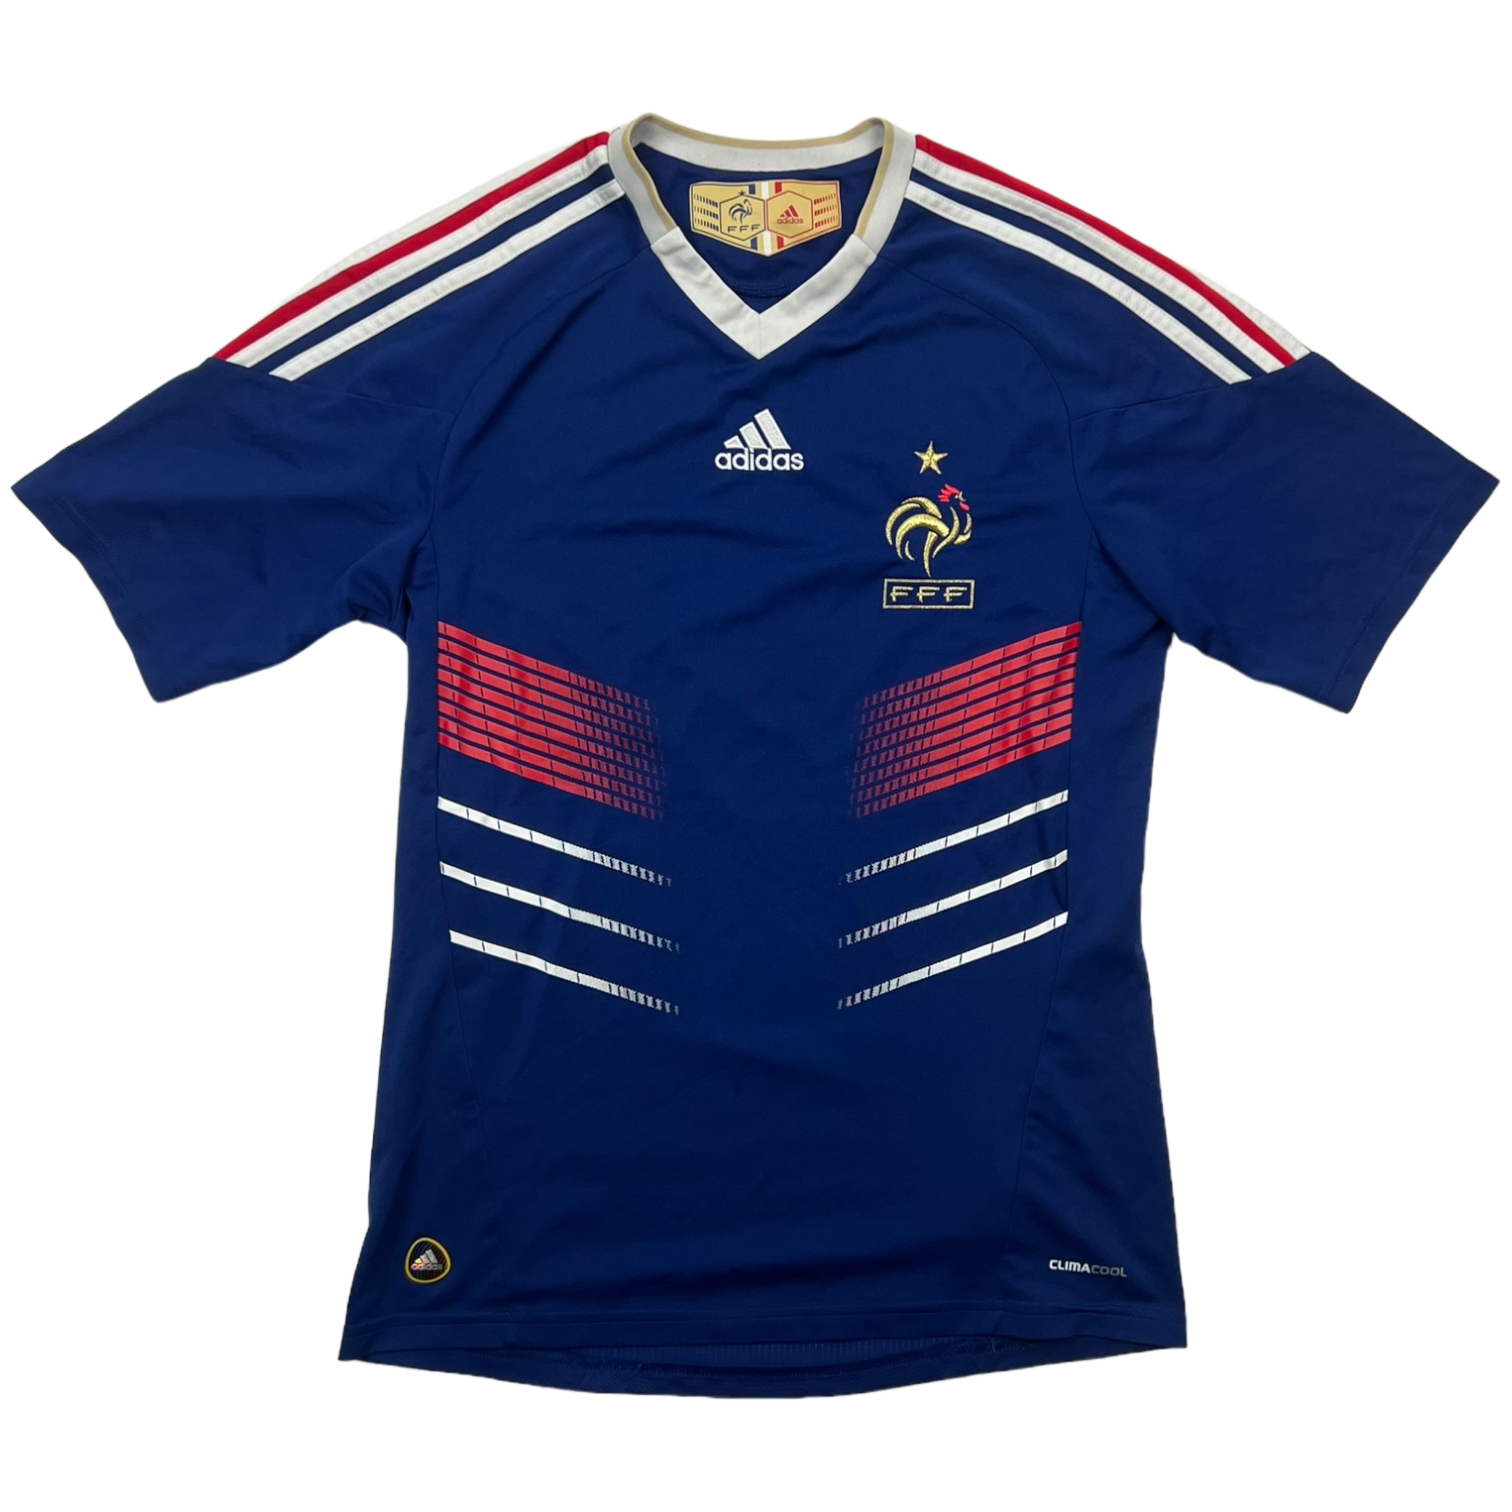 Adidas France Jersey (S)